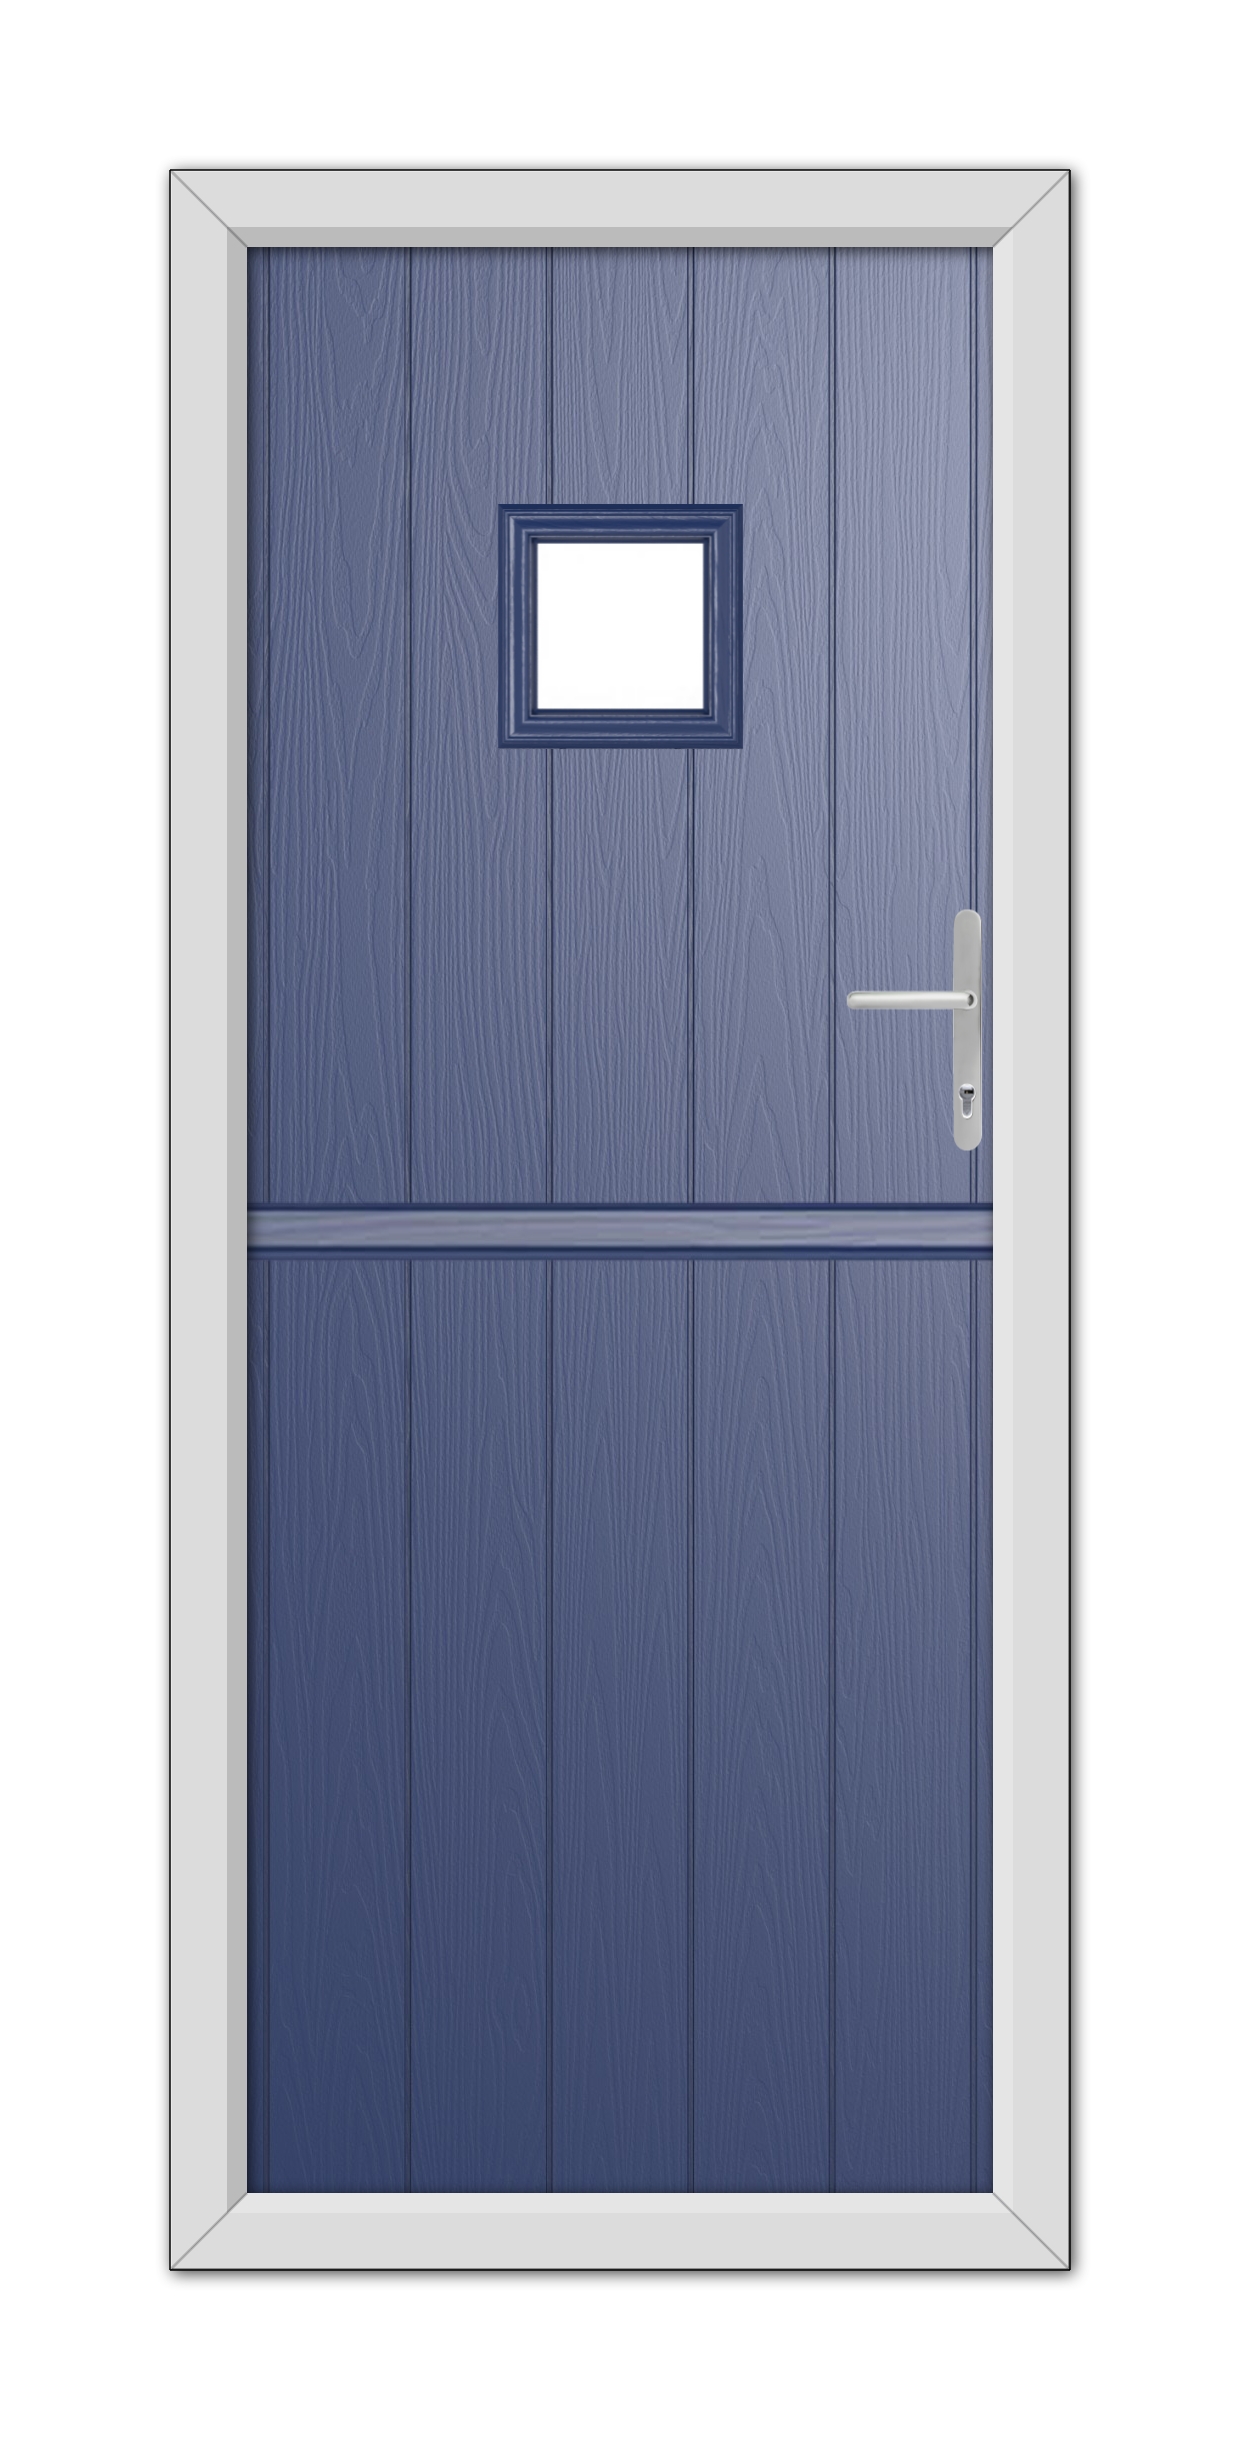 A Blue Brampton Stable Composite Door 48mm Timber Core with a small rectangular window and a white frame, featuring a modern handle on the right side.